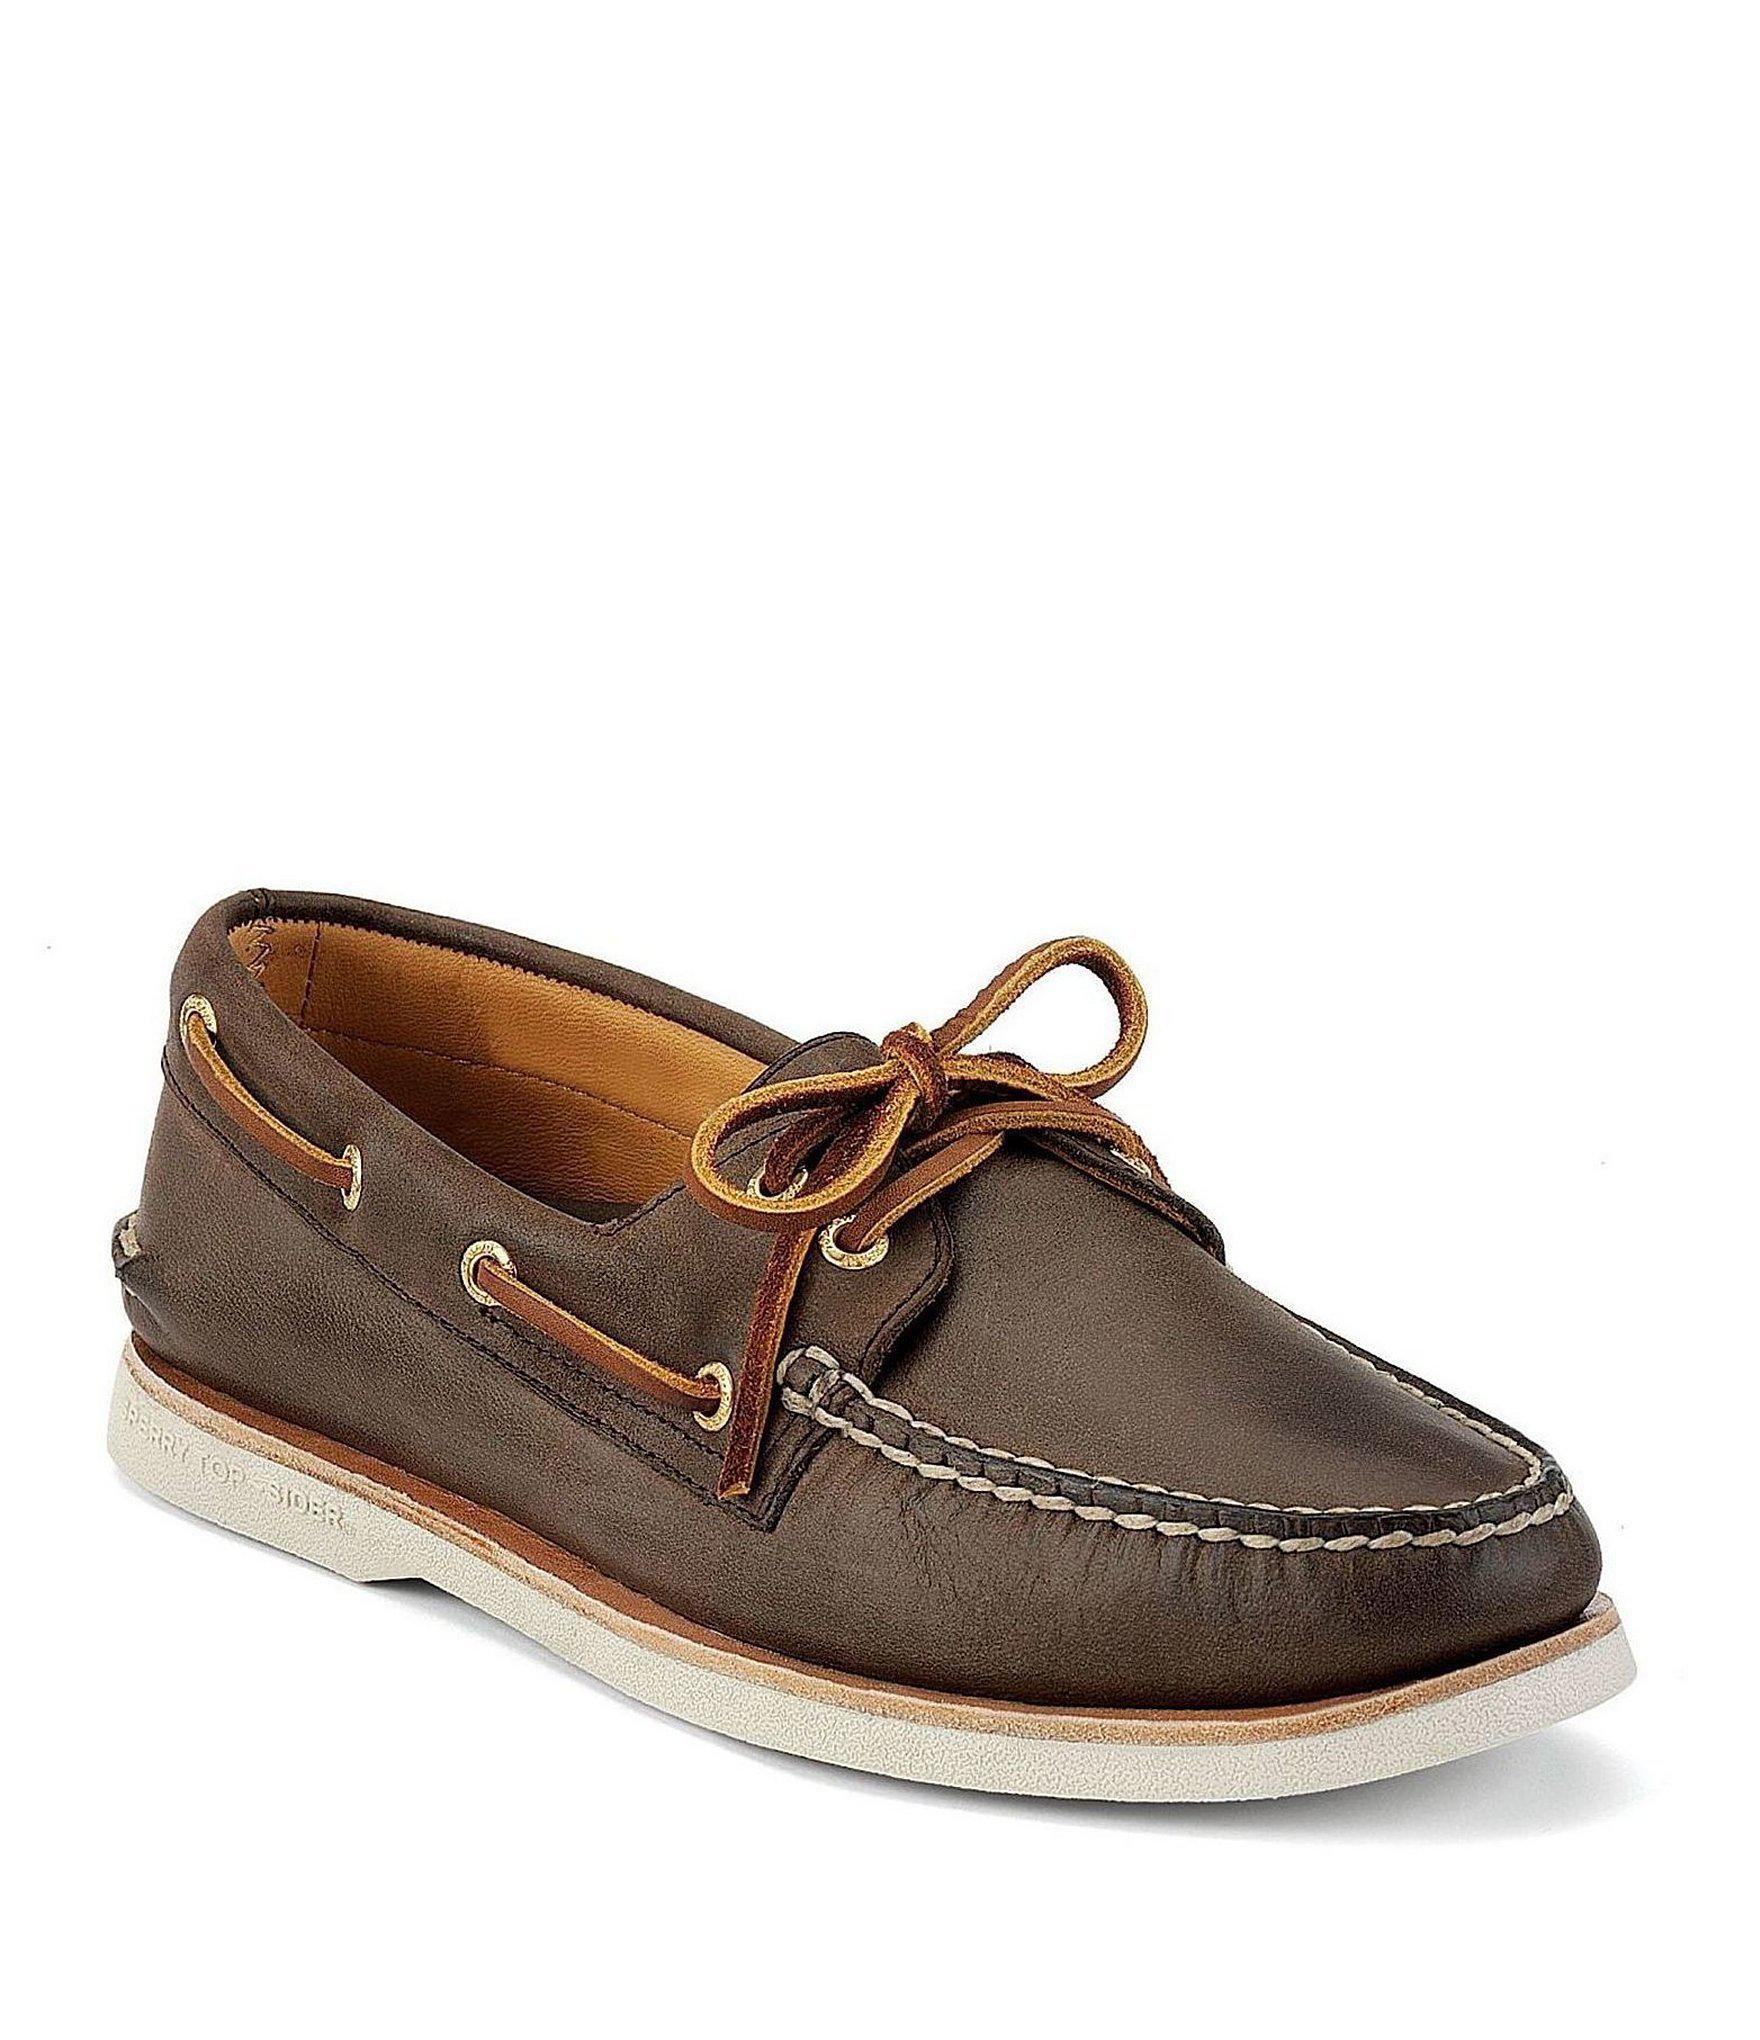 Sperry Top-Sider Canvas Top-sider Gold A/o Men´s 2-eye Boat Shoes in ...